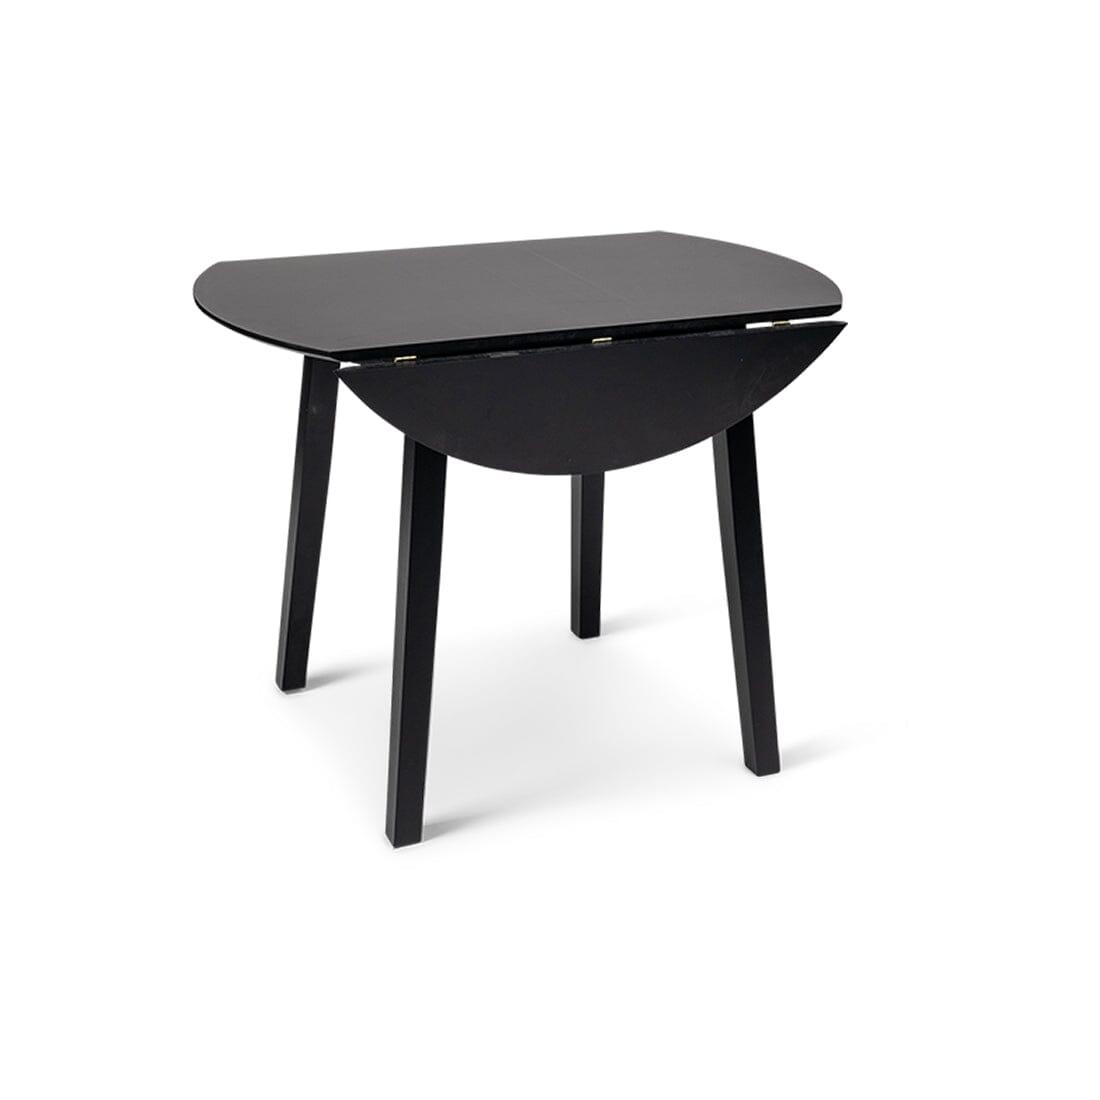 Charlie Black Round Dining Table - Laura James